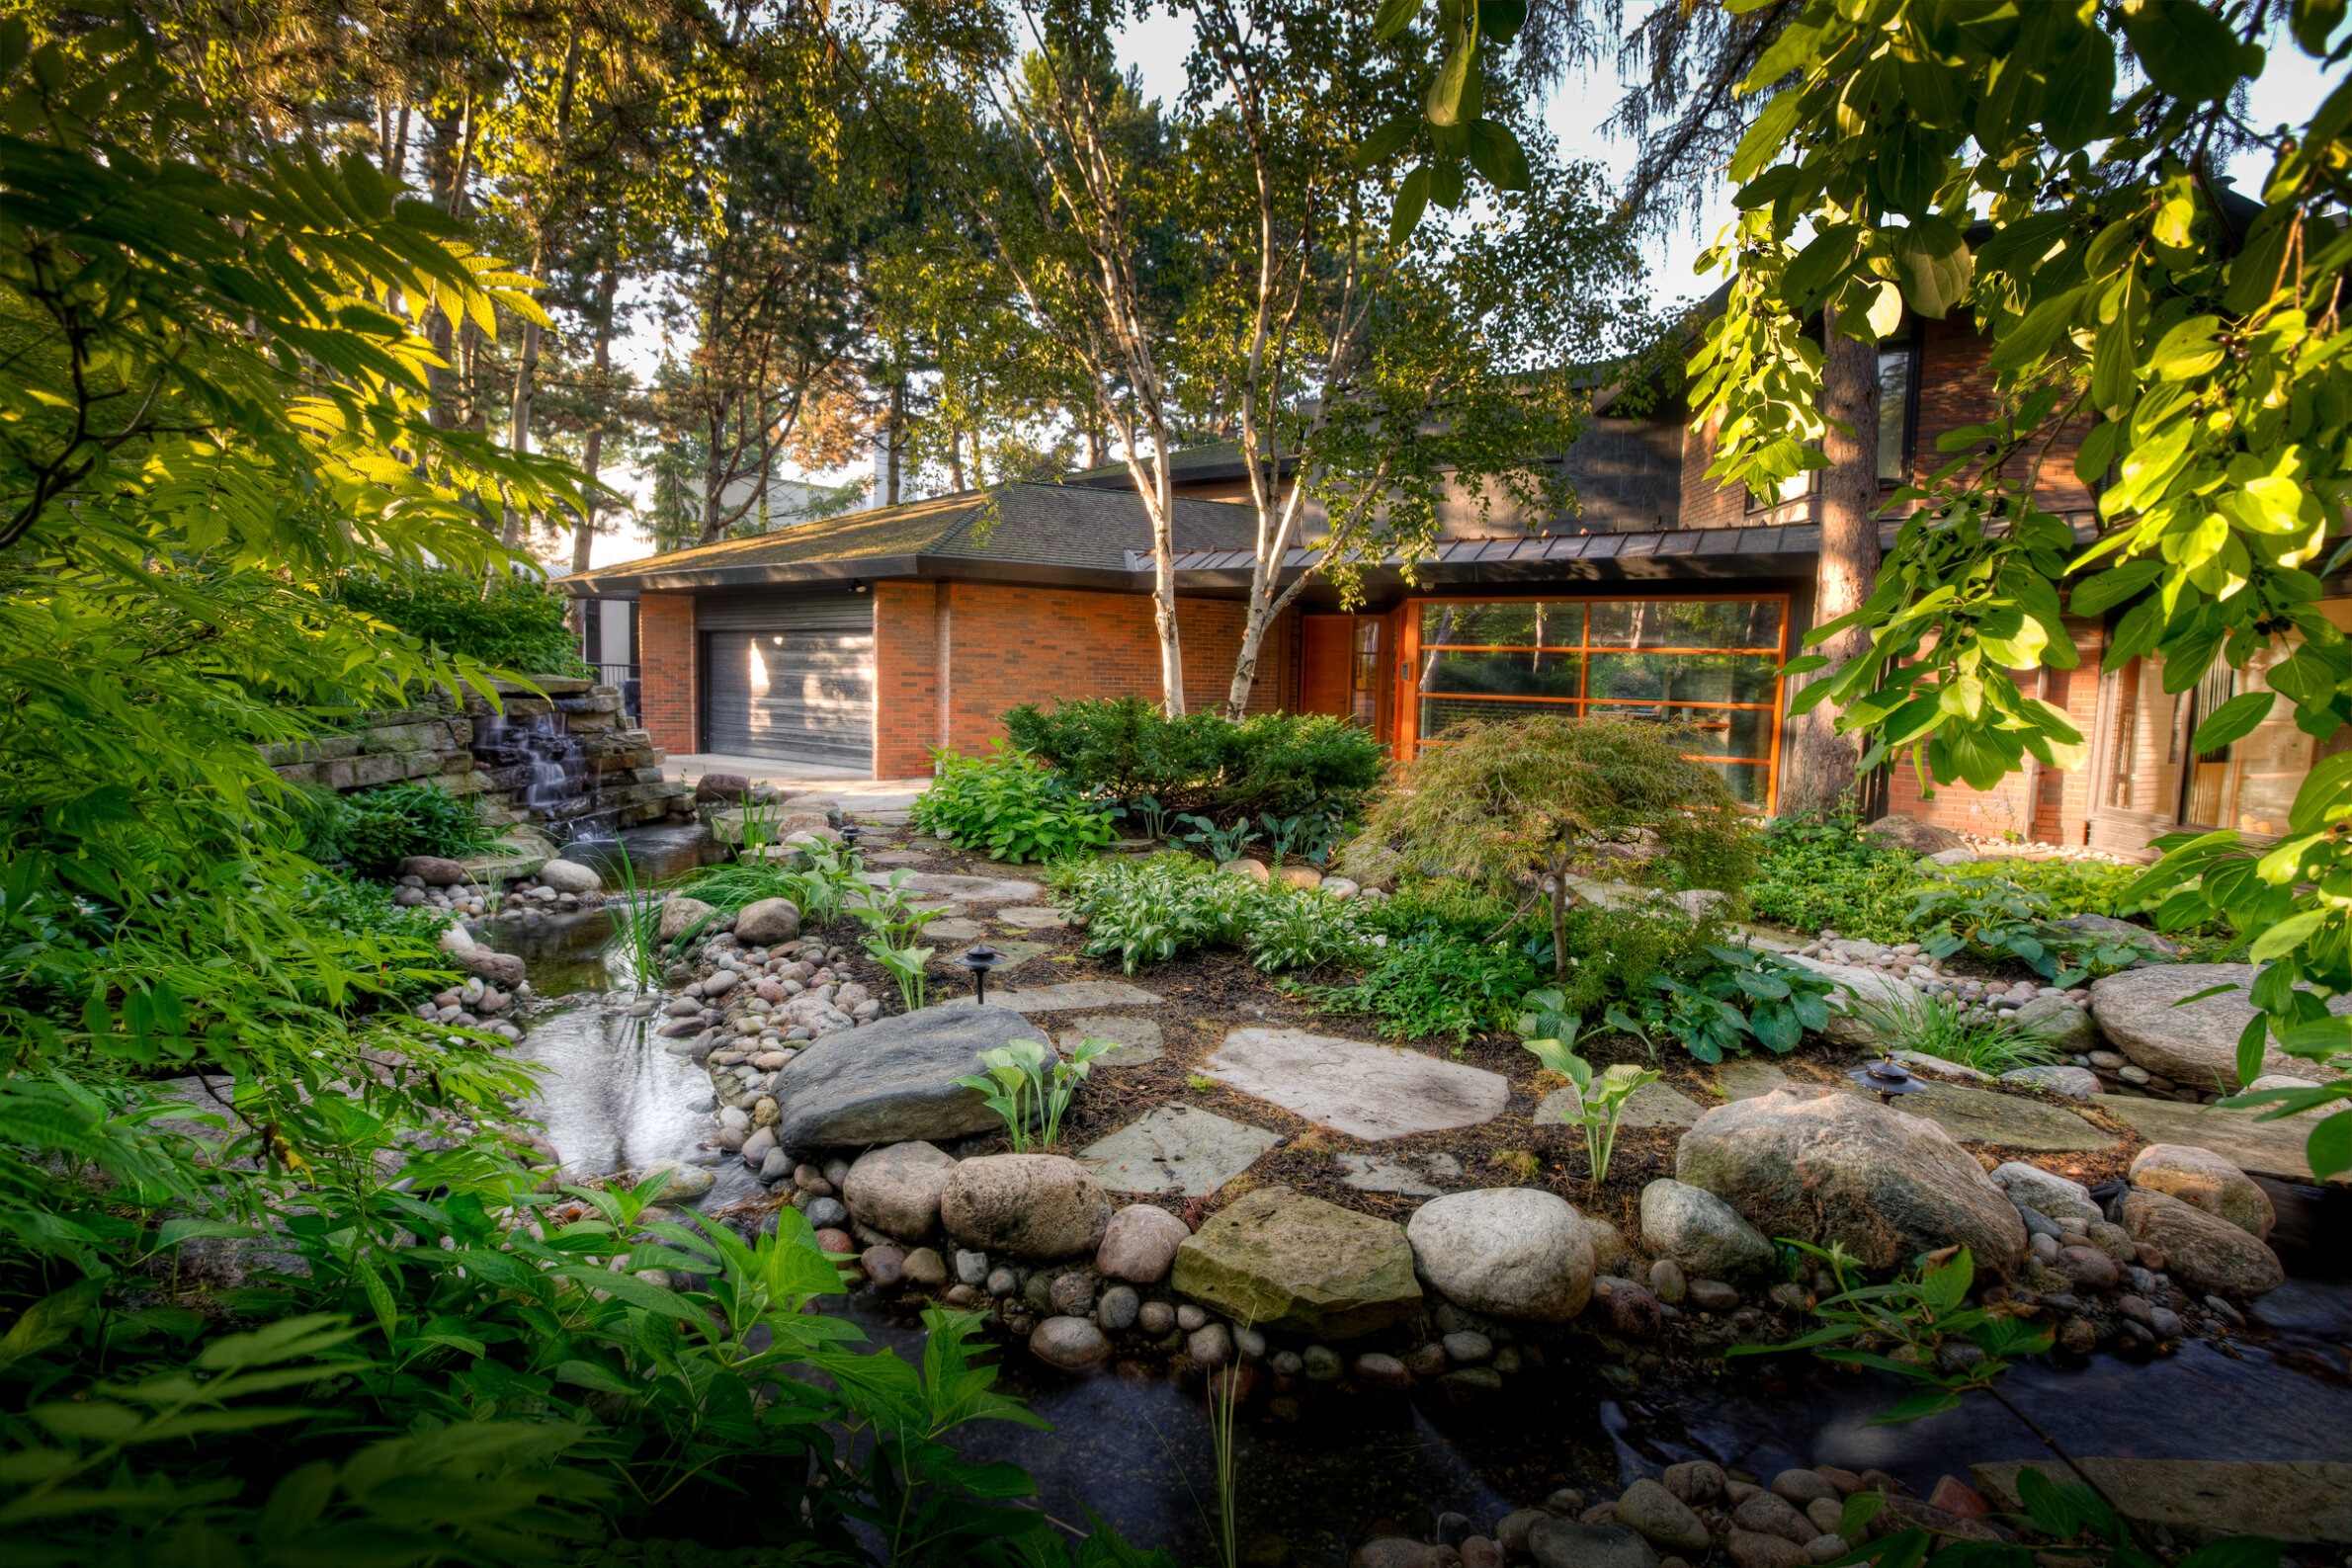 A serene residential garden with a waterfall and stream surrounded by lush greenery, leading up to a brick house with large windows nestled among trees.